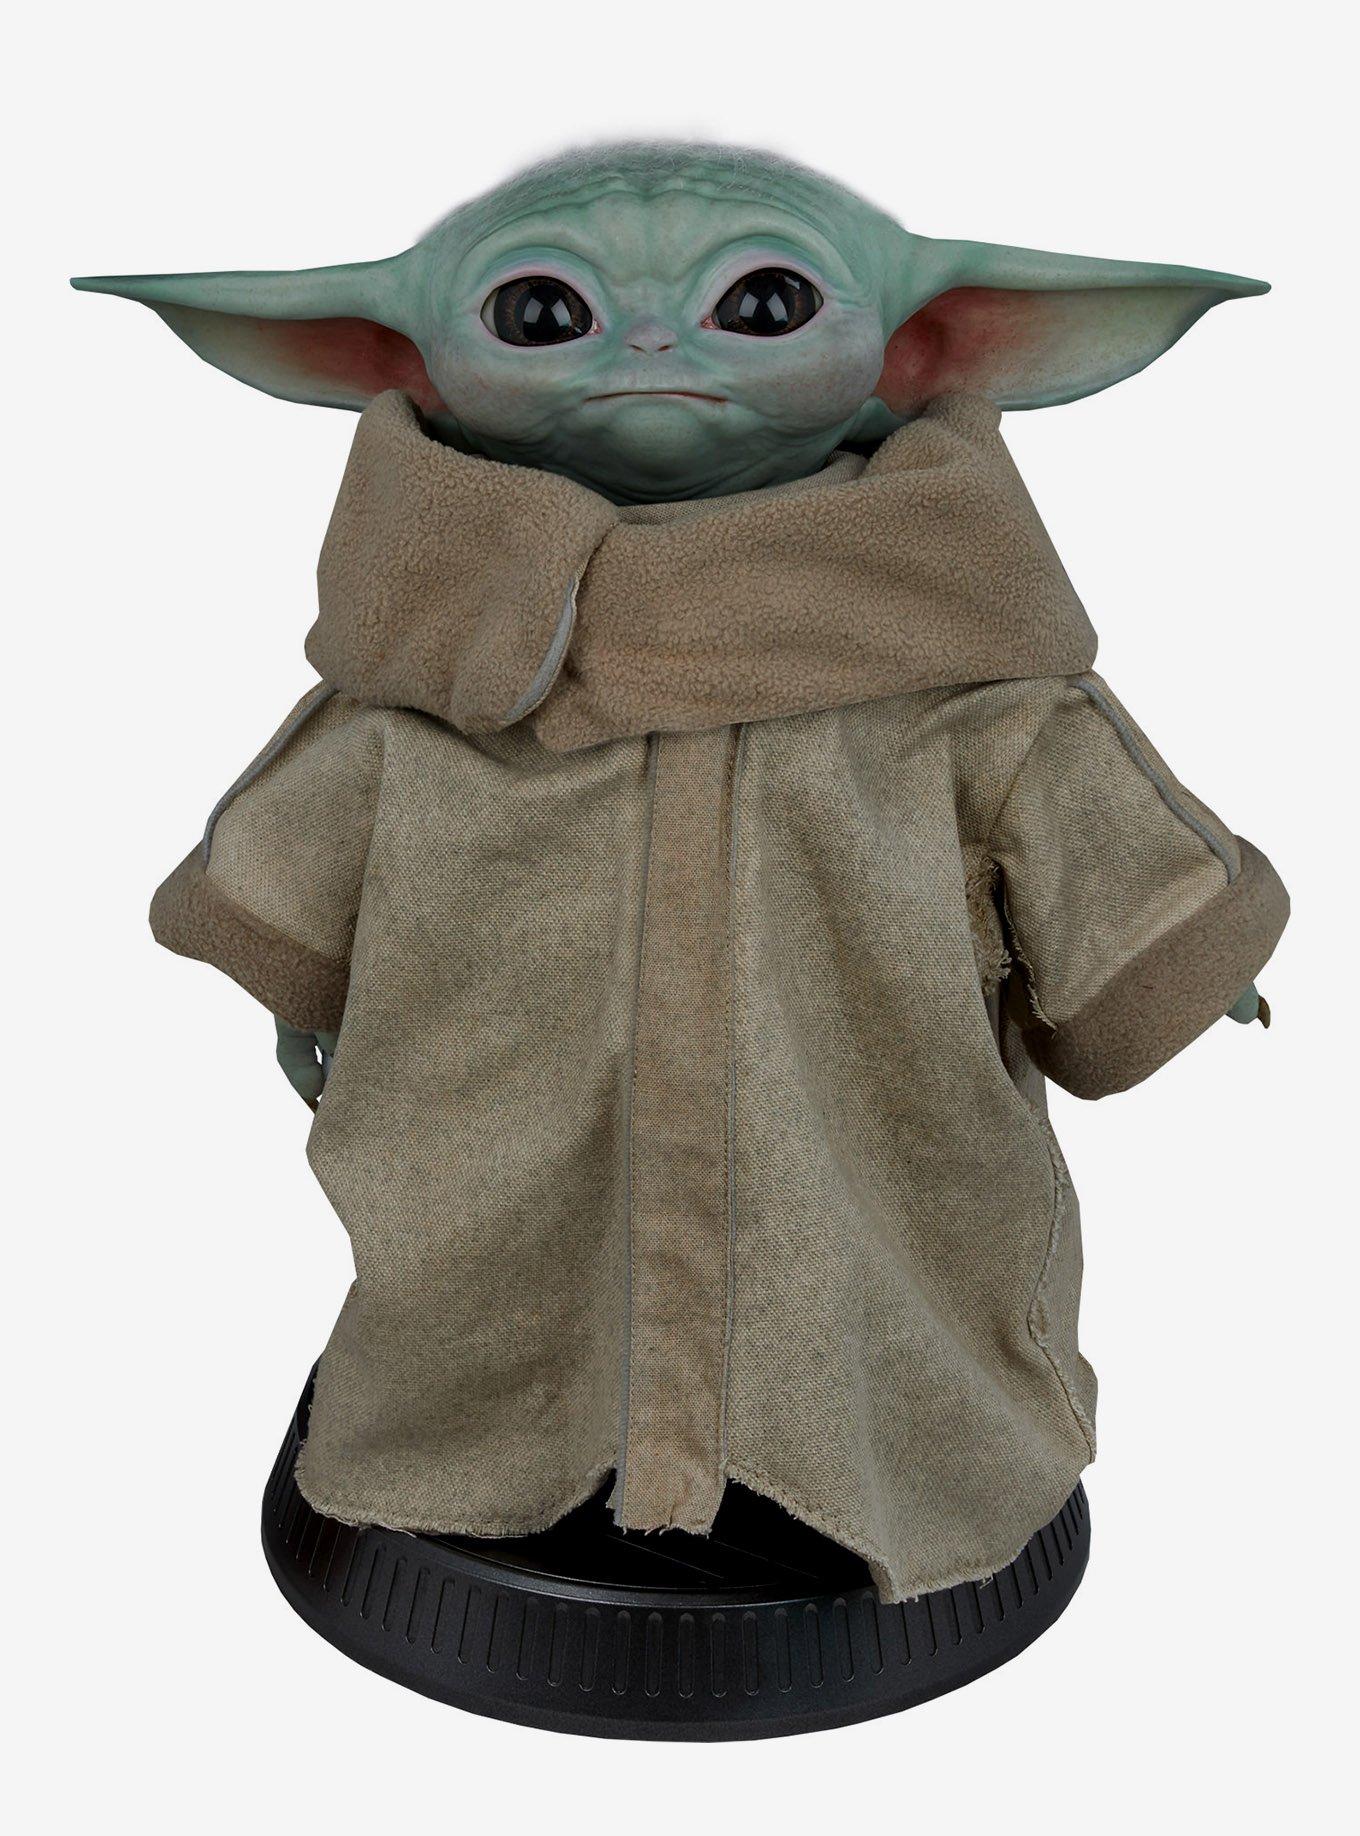 Yes, Hot Toys Has a Life-Sized Baby Yoda Figure Coming